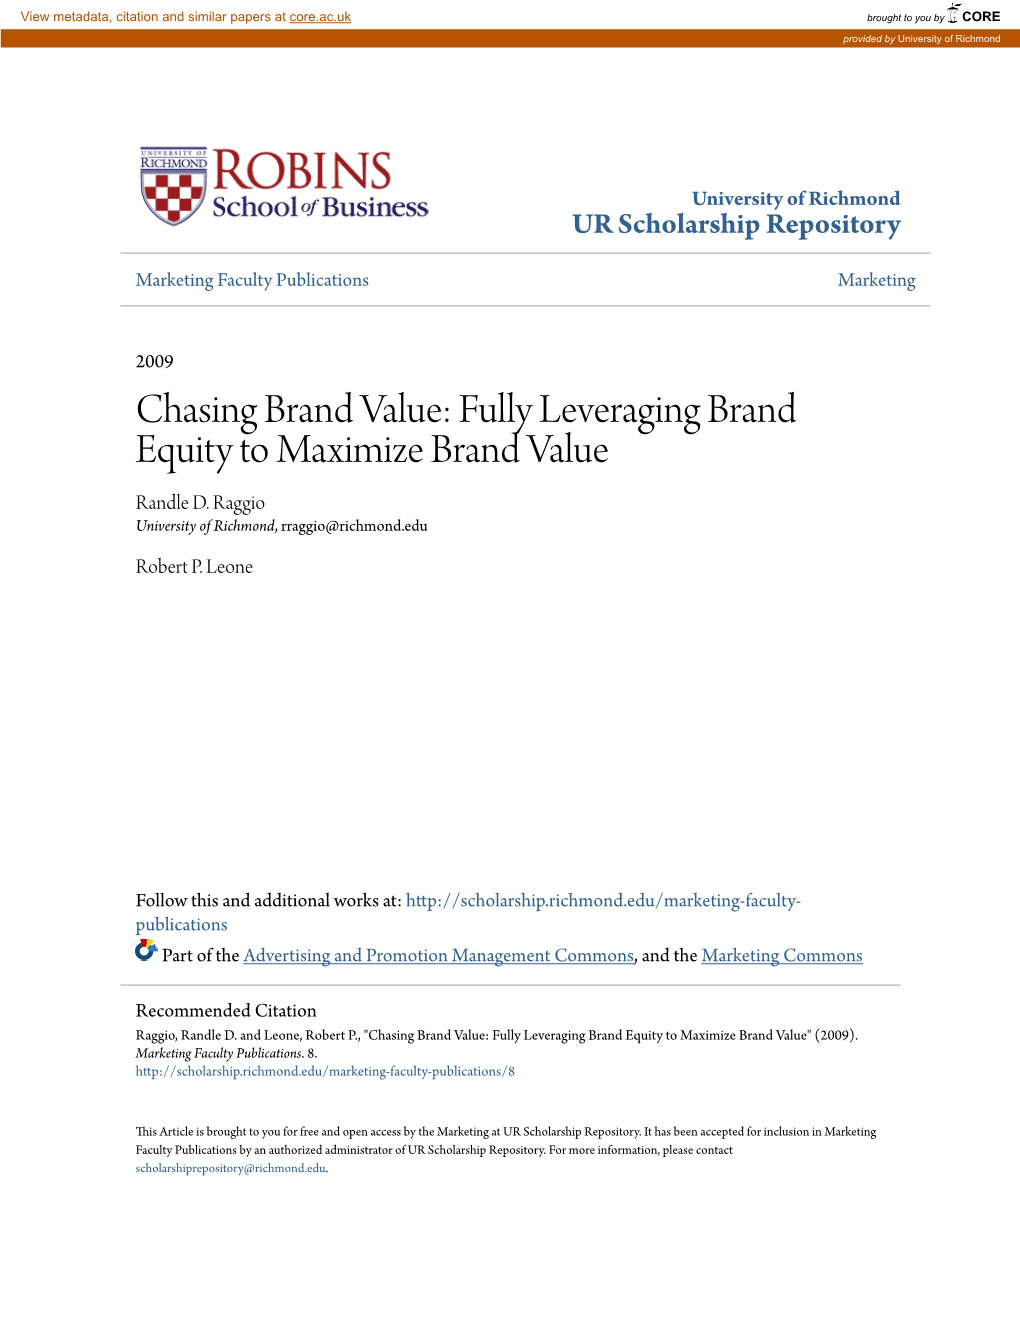 Fully Leveraging Brand Equity to Maximize Brand Value Randle D